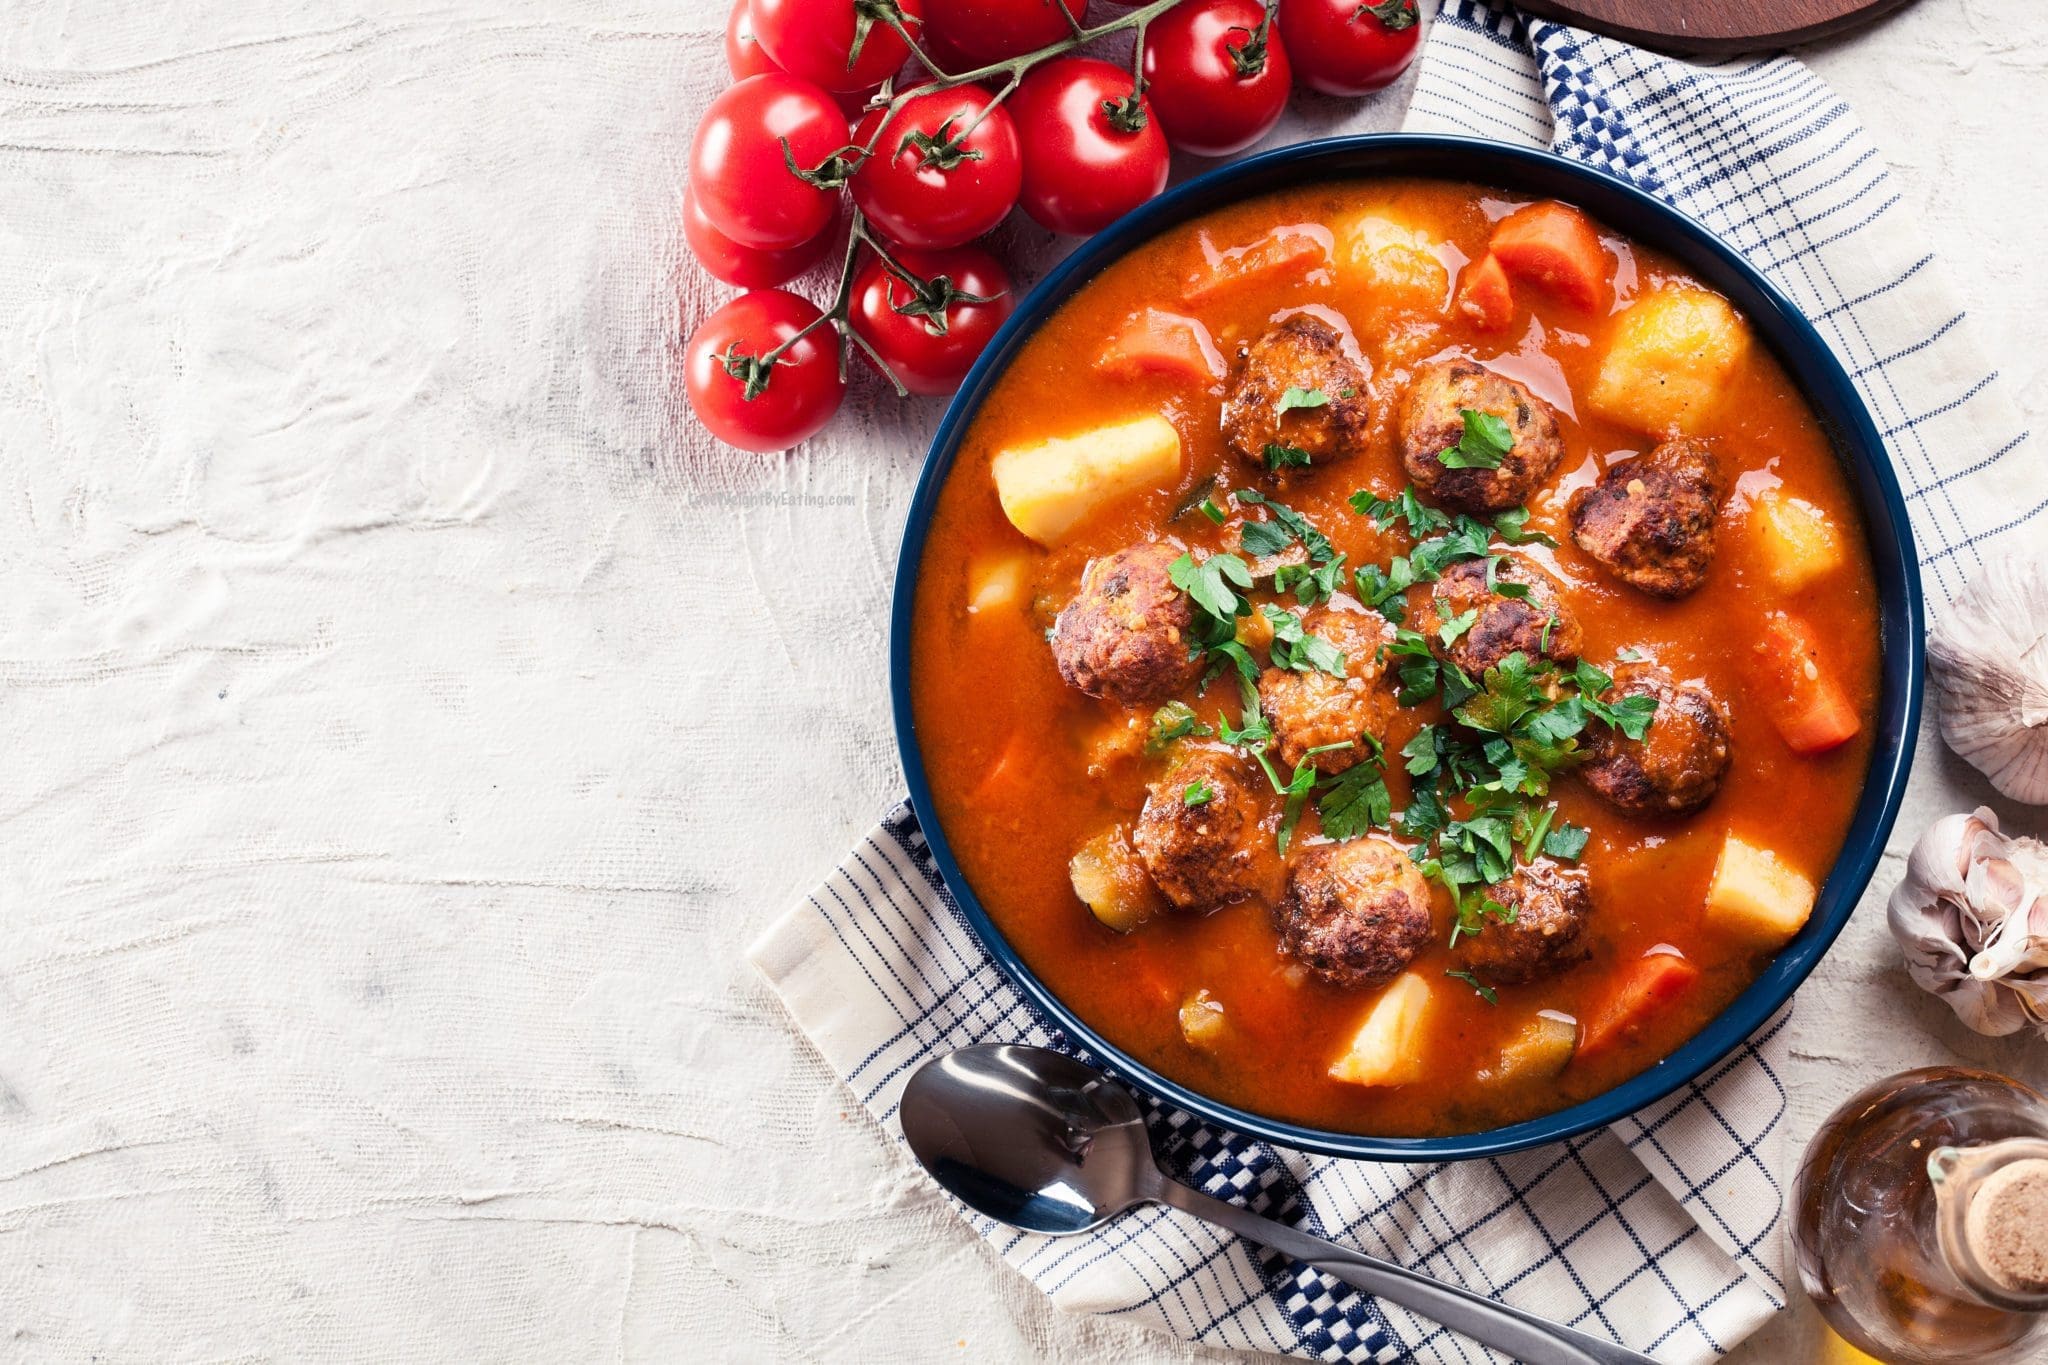 Healthy Albondigas Soup - Lose Weight By Eating